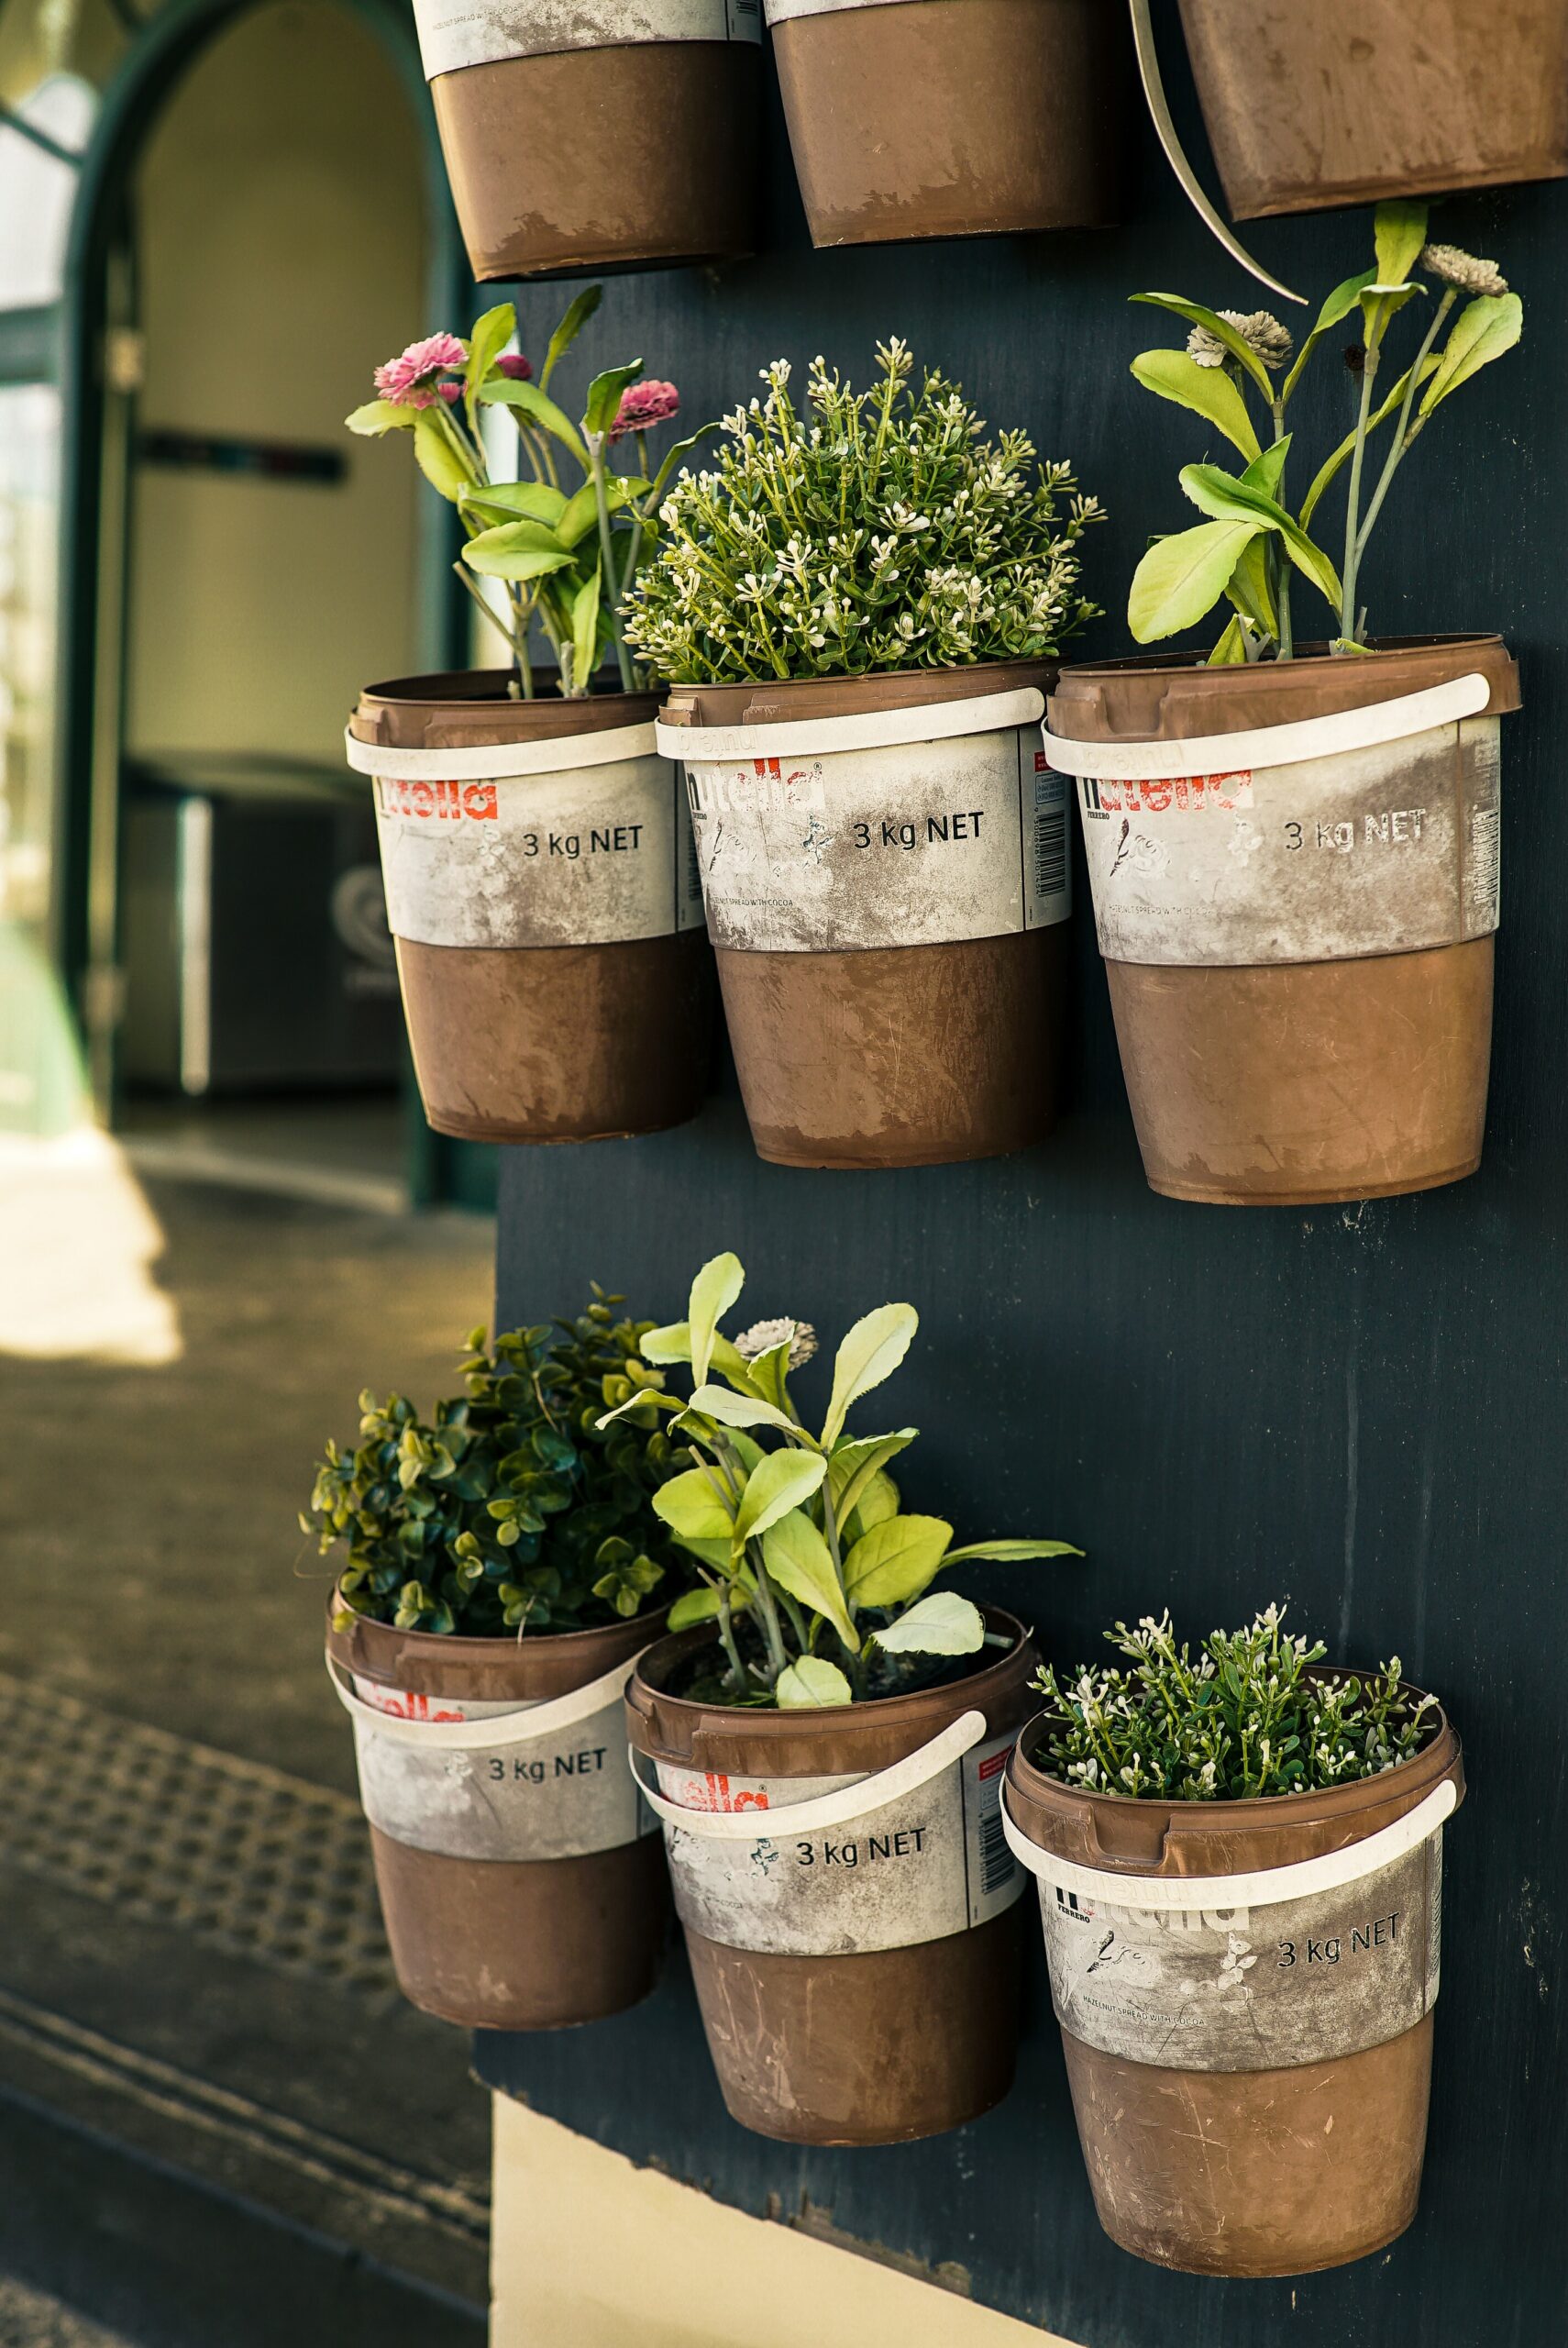 Guide to Container Gardening